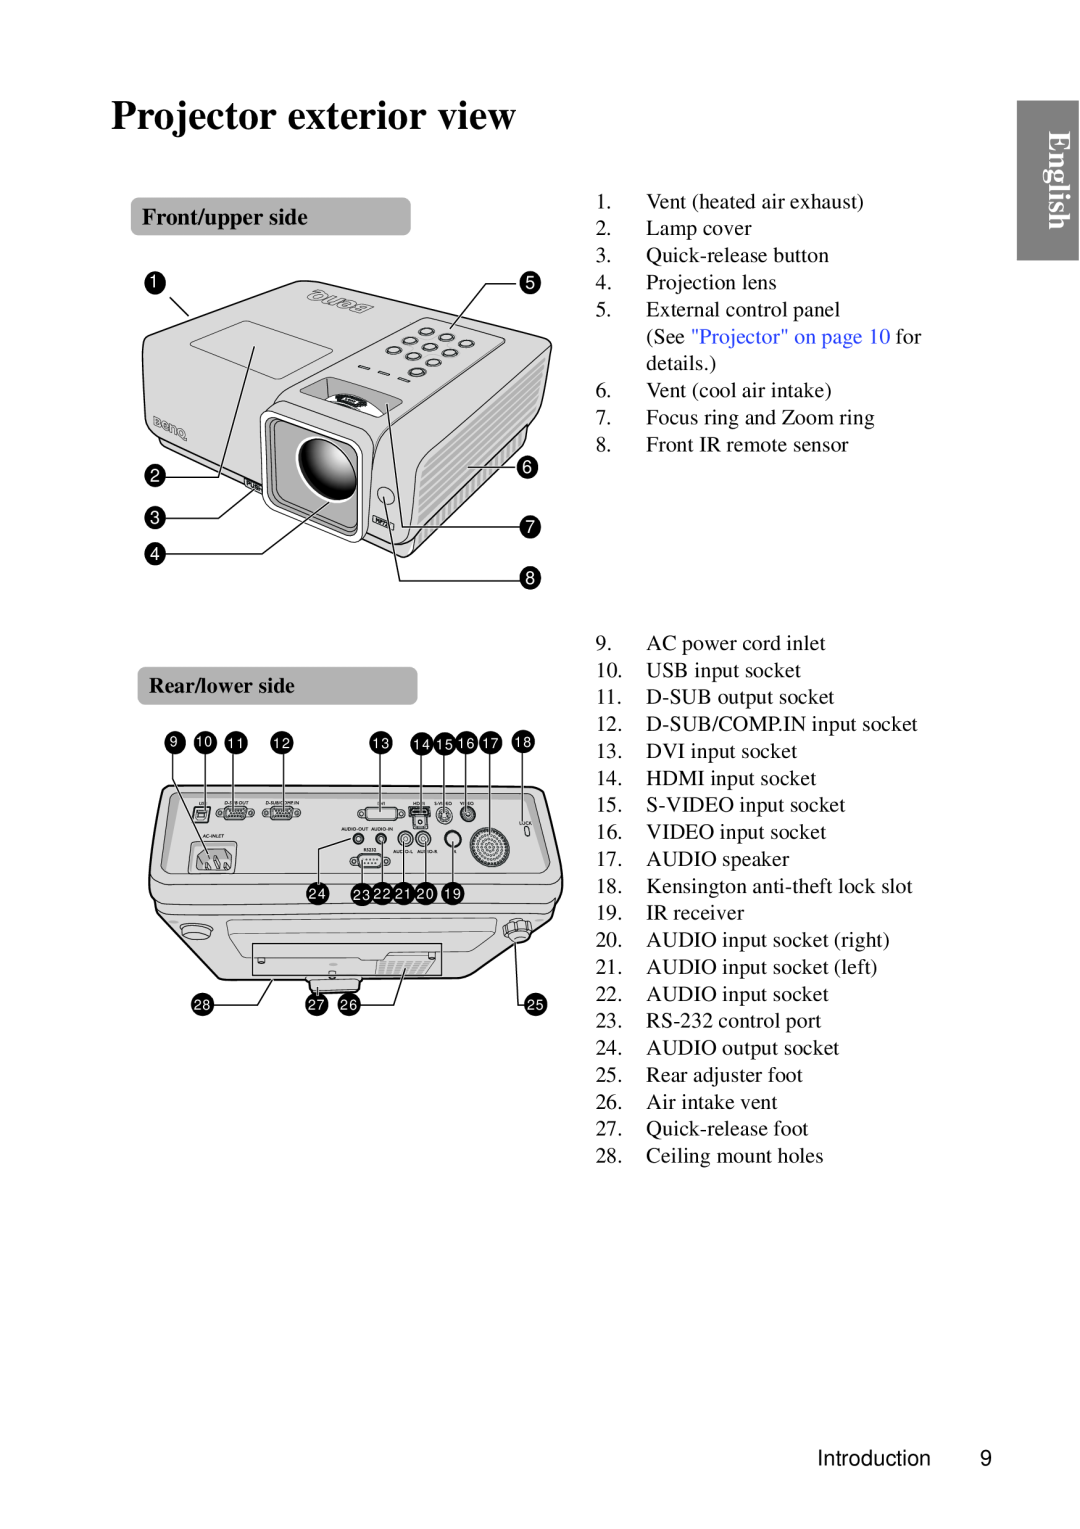 BenQ MP727, MP735 user manual Projector exterior view, English, Front/upper side 